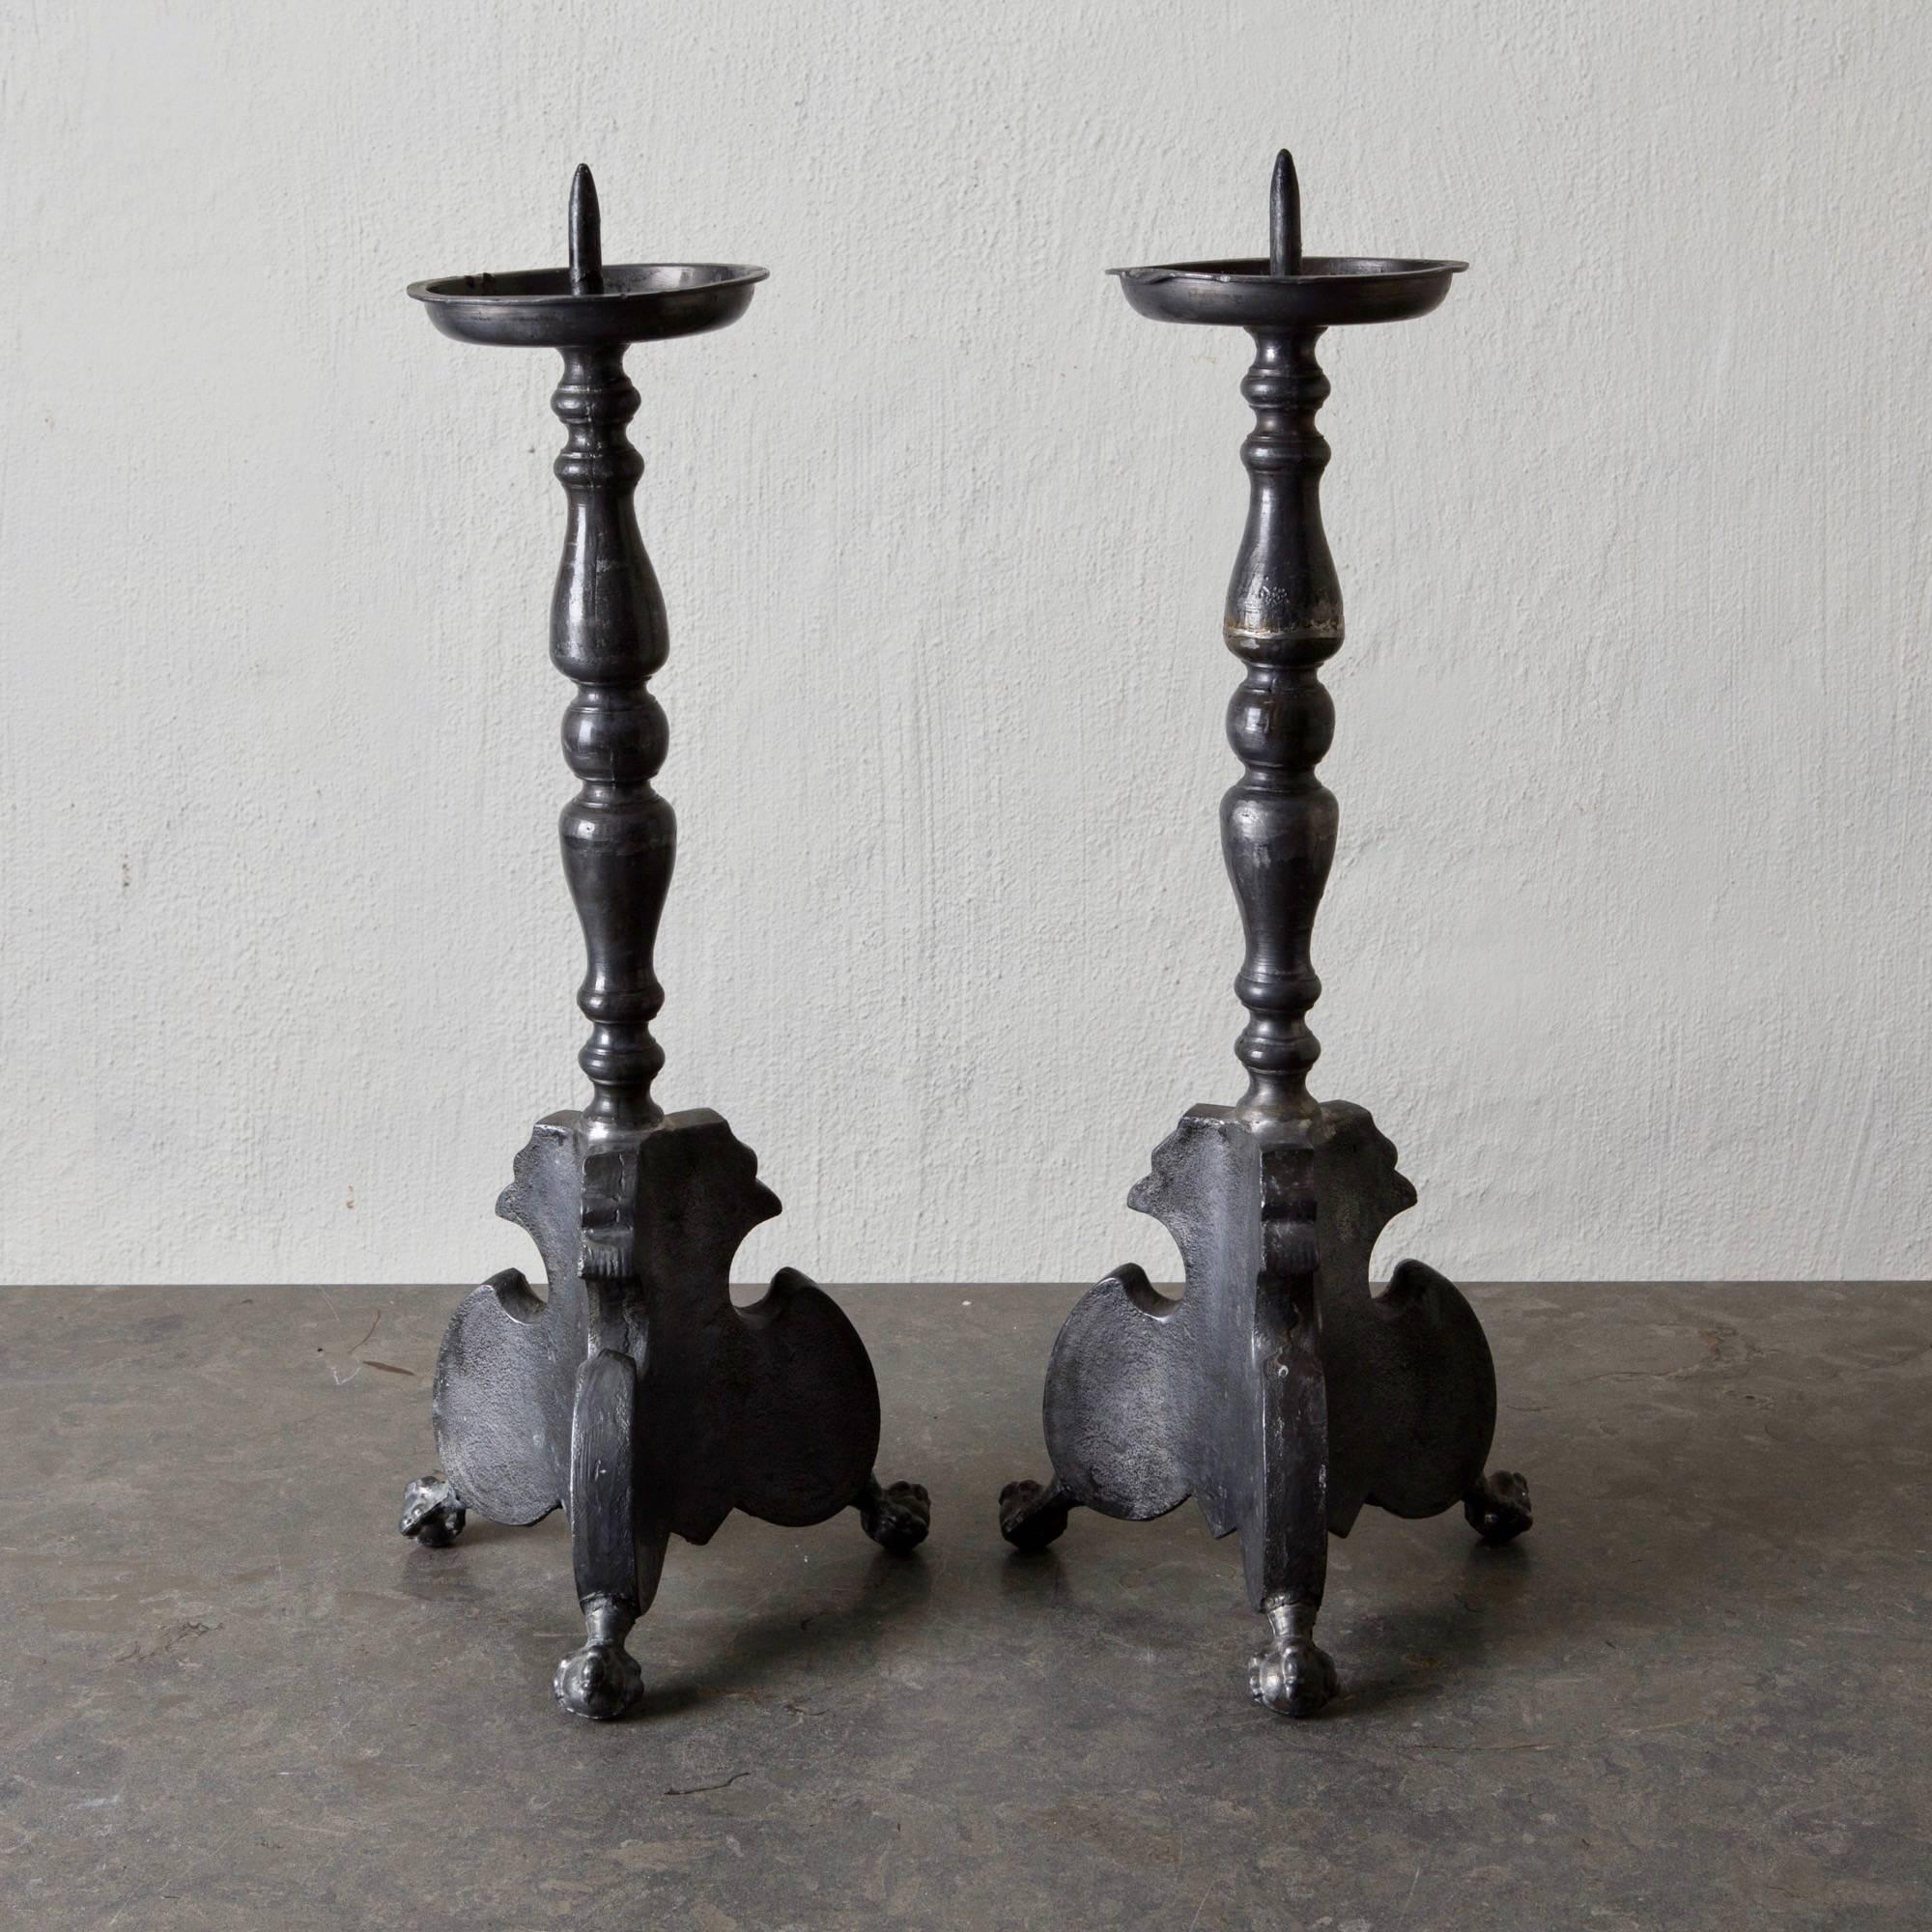 Candlesticks Spanish tall pewter gray Baroque, Spain. A pair of candlesticks made during the Baroque period in Spain or Southern Europe. Made from pewter in beautiful gray tone.